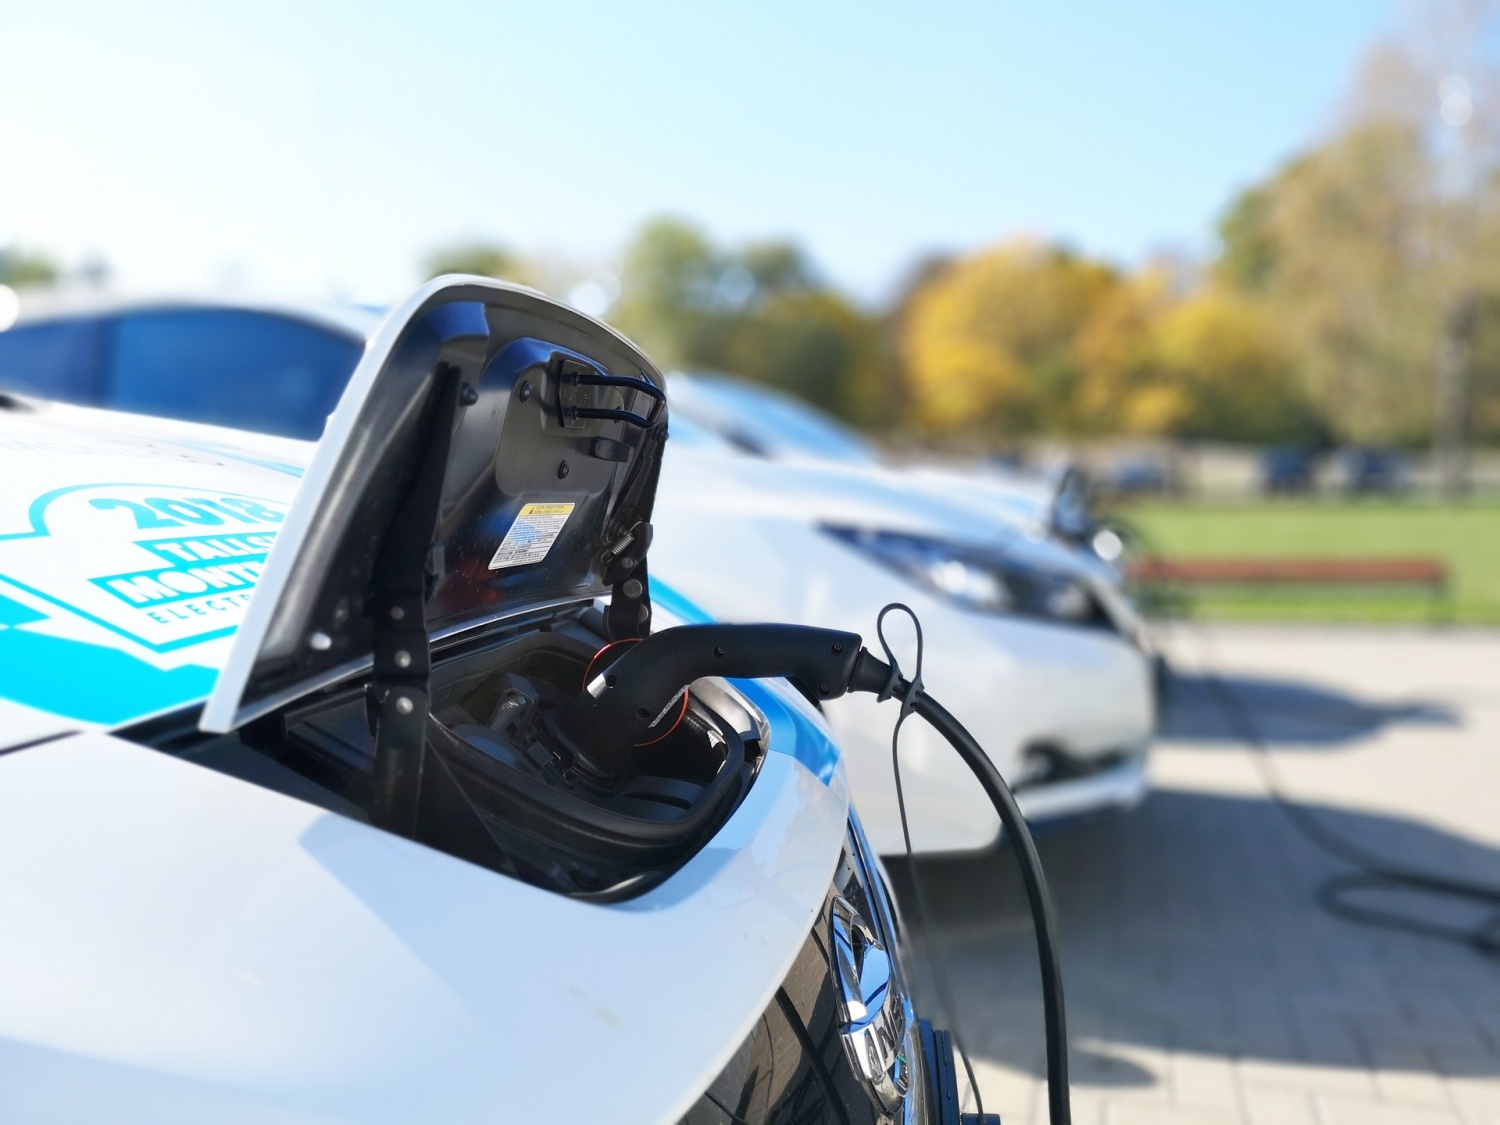 Preventing Lithium Plating Enables Faster Charging for EVs, New Study Finds